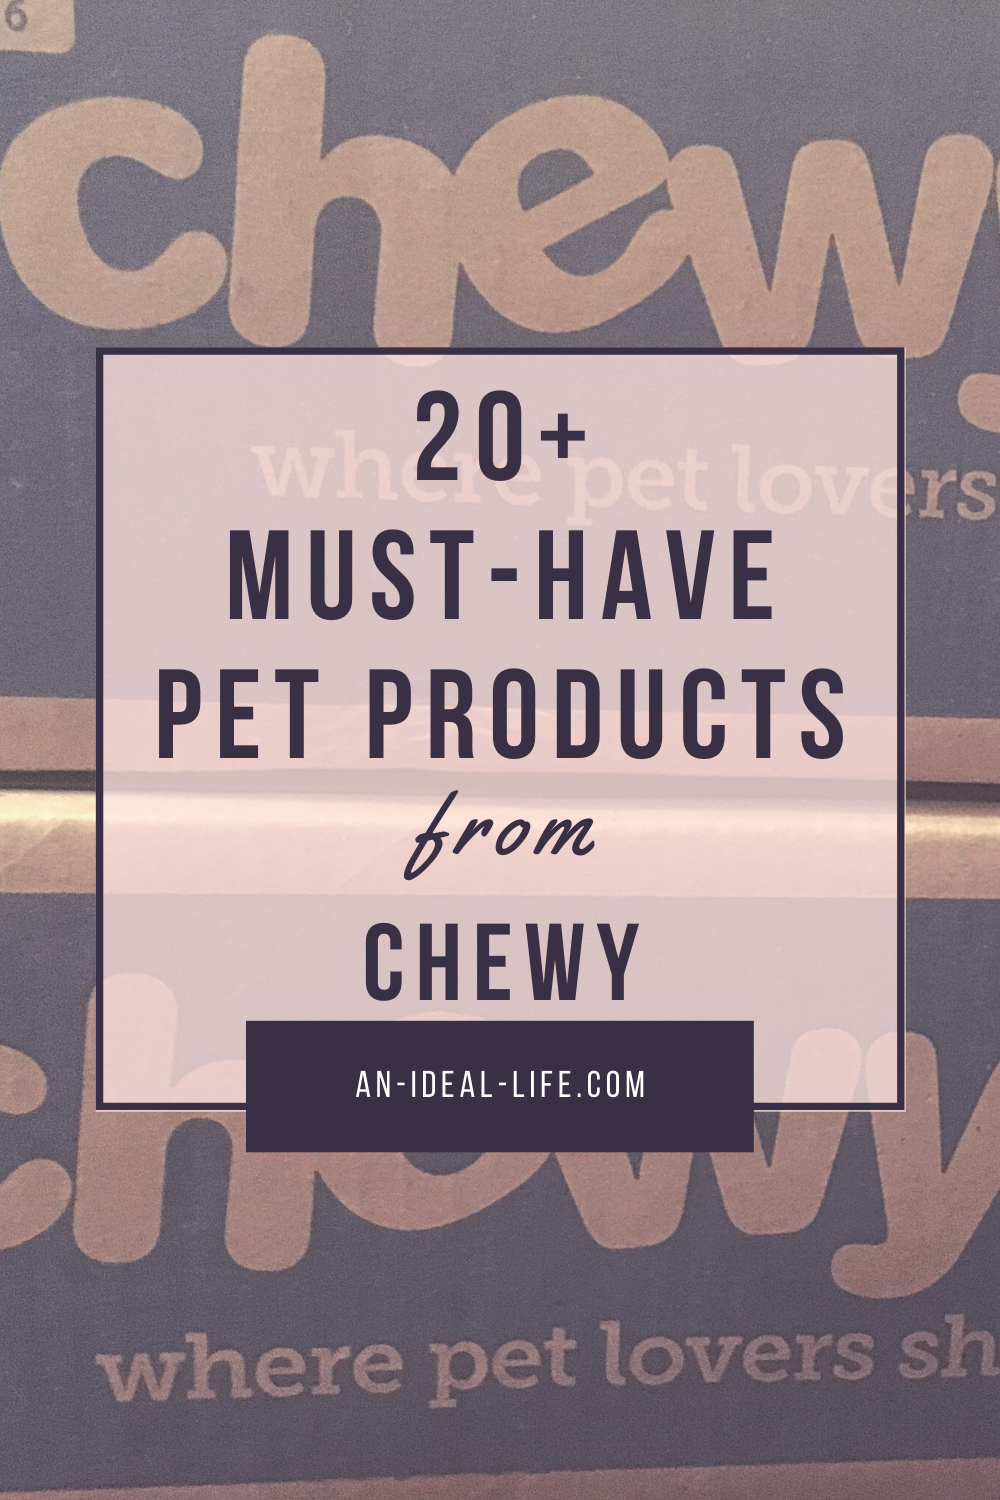 chewy must-haves